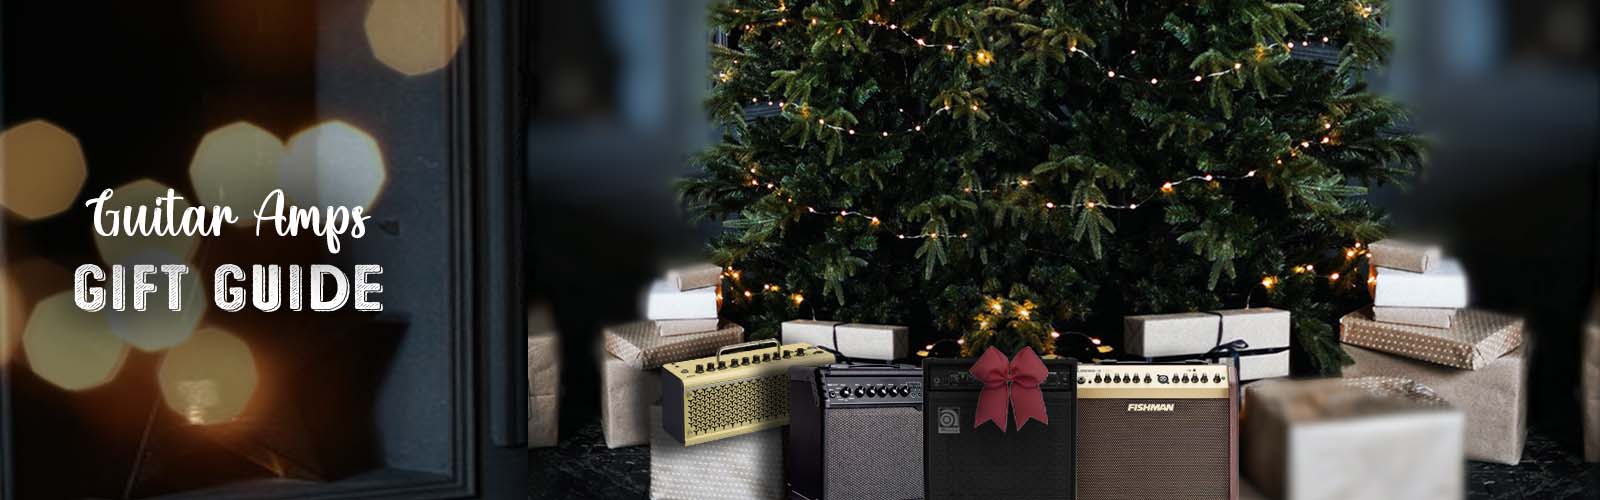 Guitar Amps Gift Guide Banner